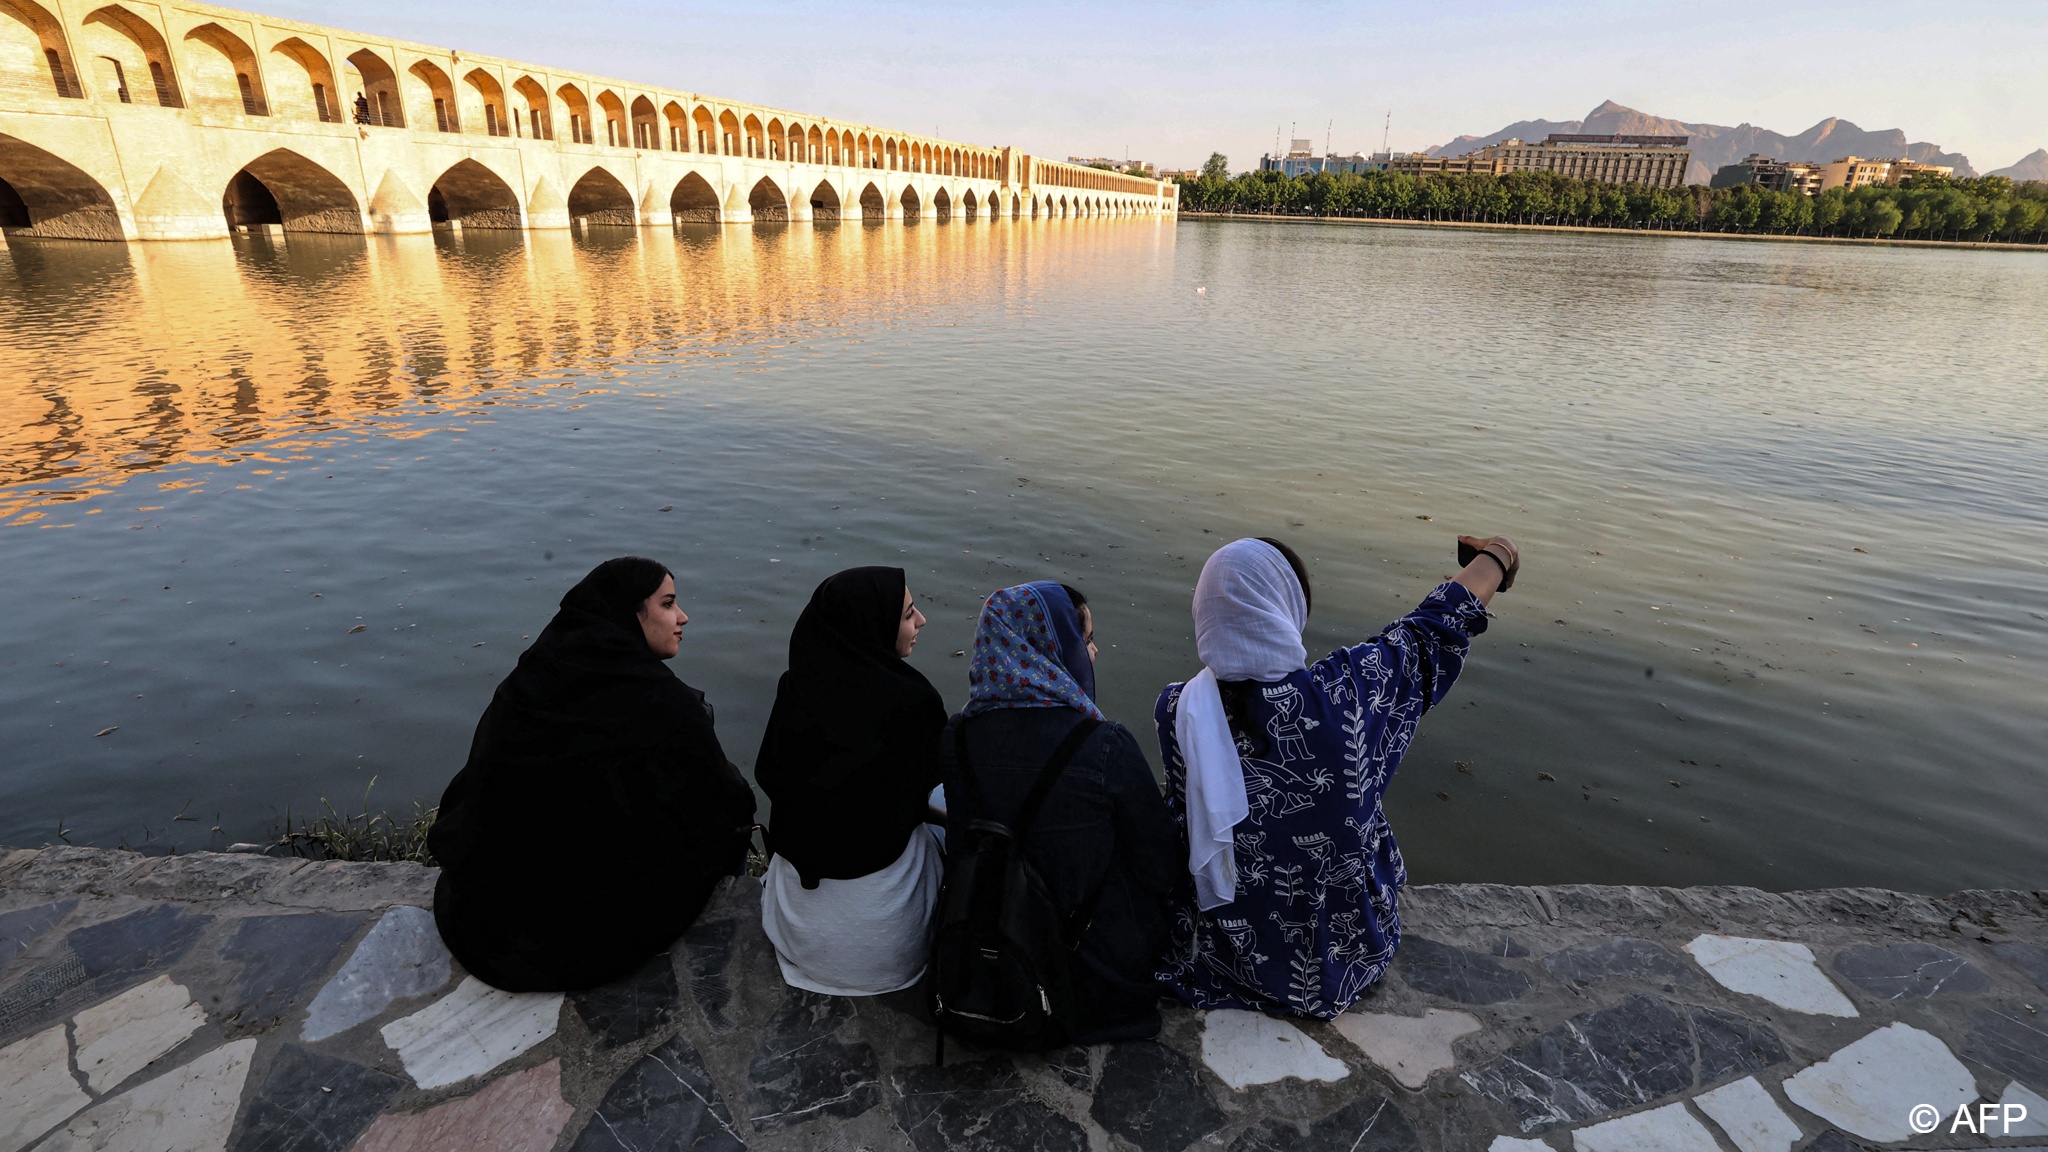 Women pose for a selfie along the bank of the Zayandeh Rood in Iran's central city of Isfahan on 15 May 2022 (photo: ATTA KENARE/AFP)